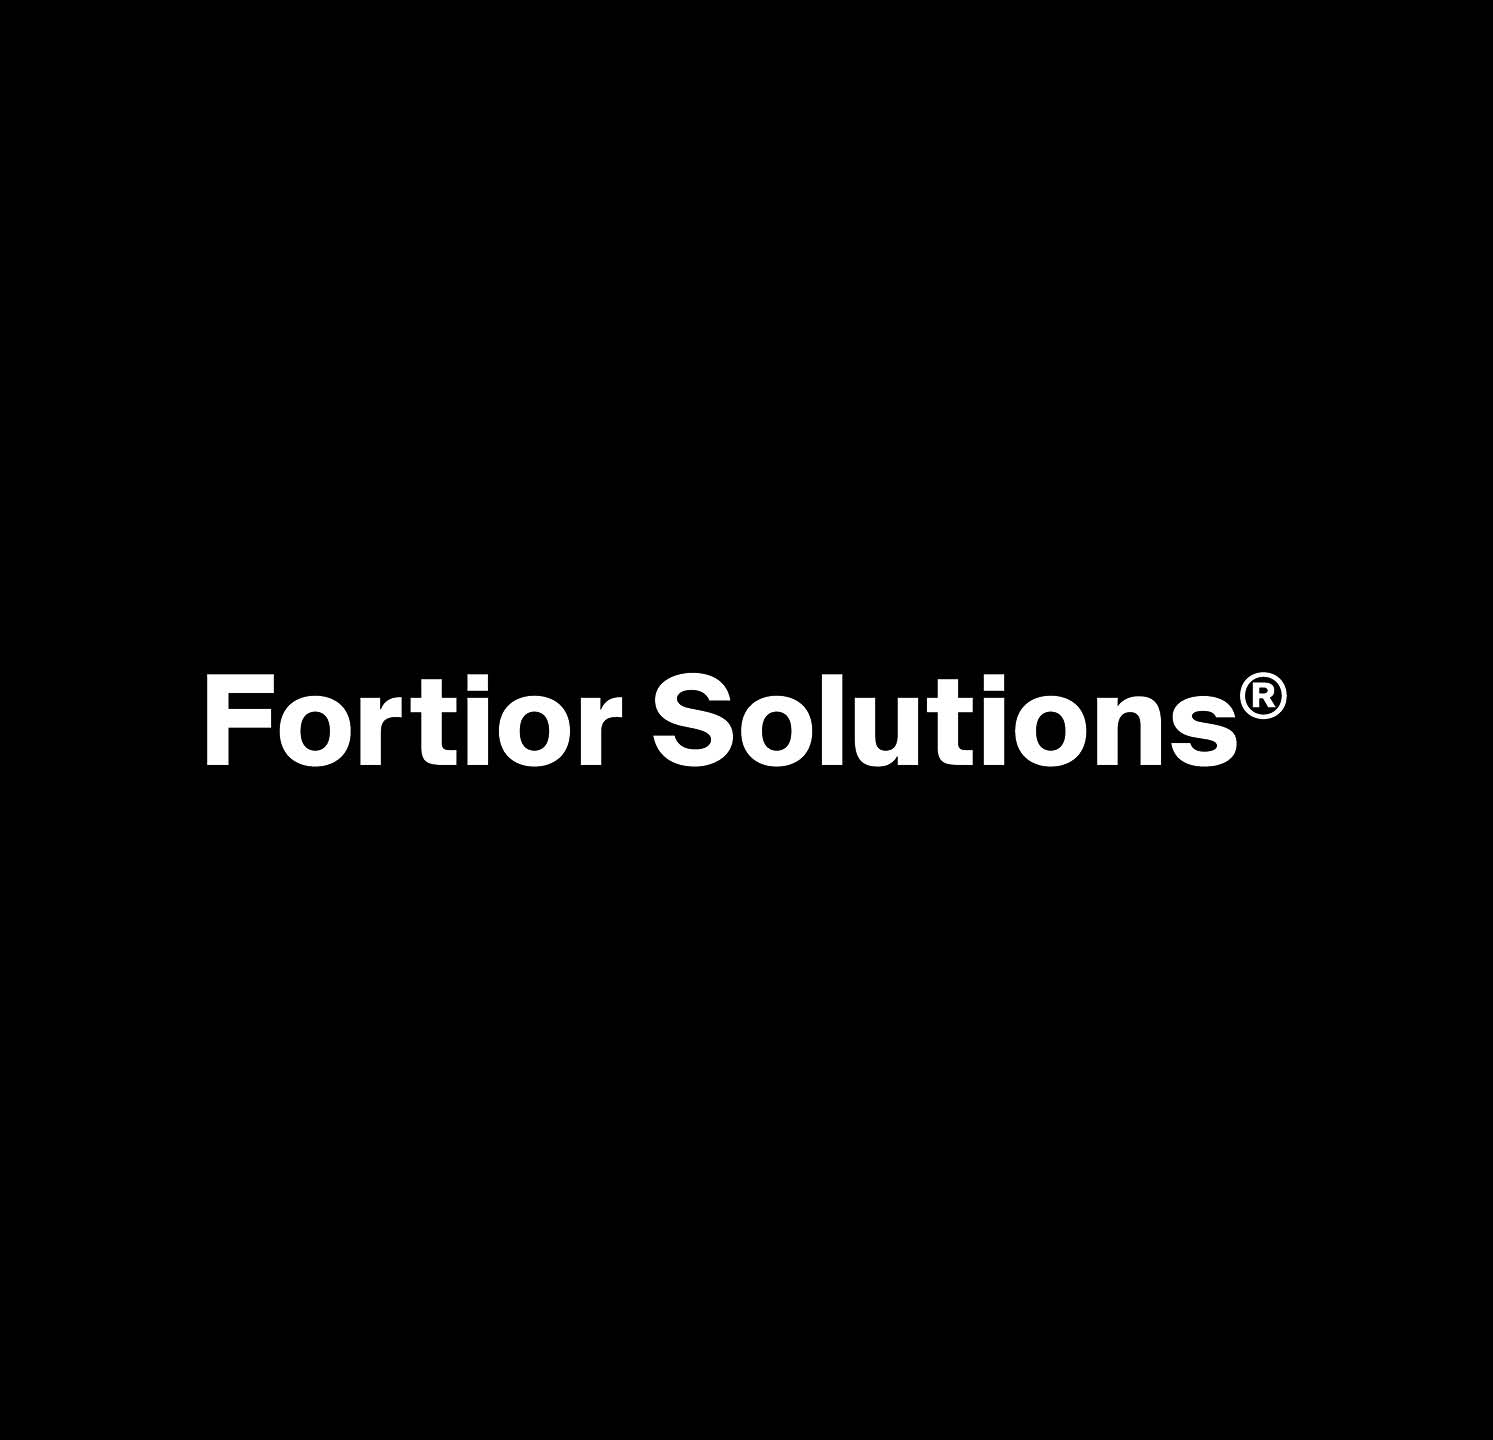 Fortior Solutions Celebrates More Than 20 Years of Innovation and is Poised for Growth with New Brand